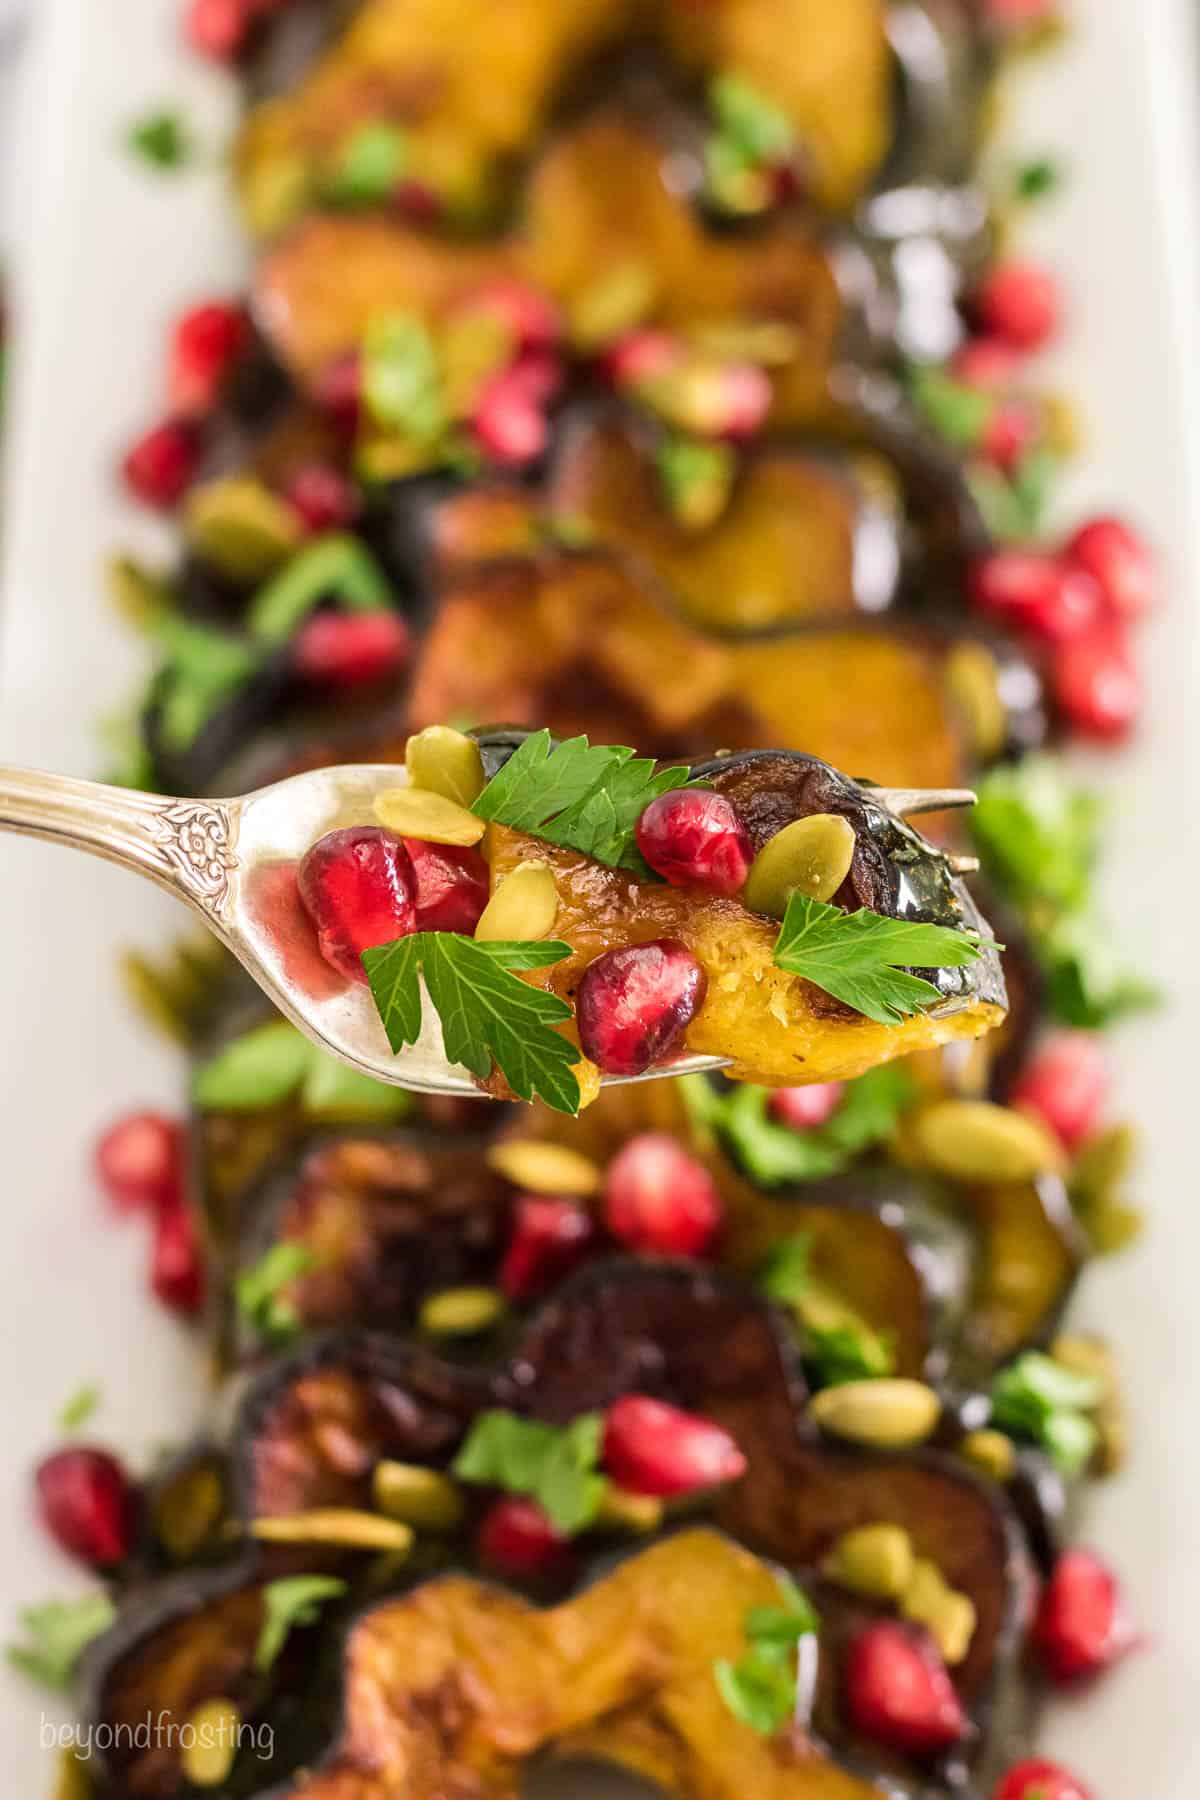 A spoon holding a bite of baked acorn squash, pumpkin seeds and pomegranate arils